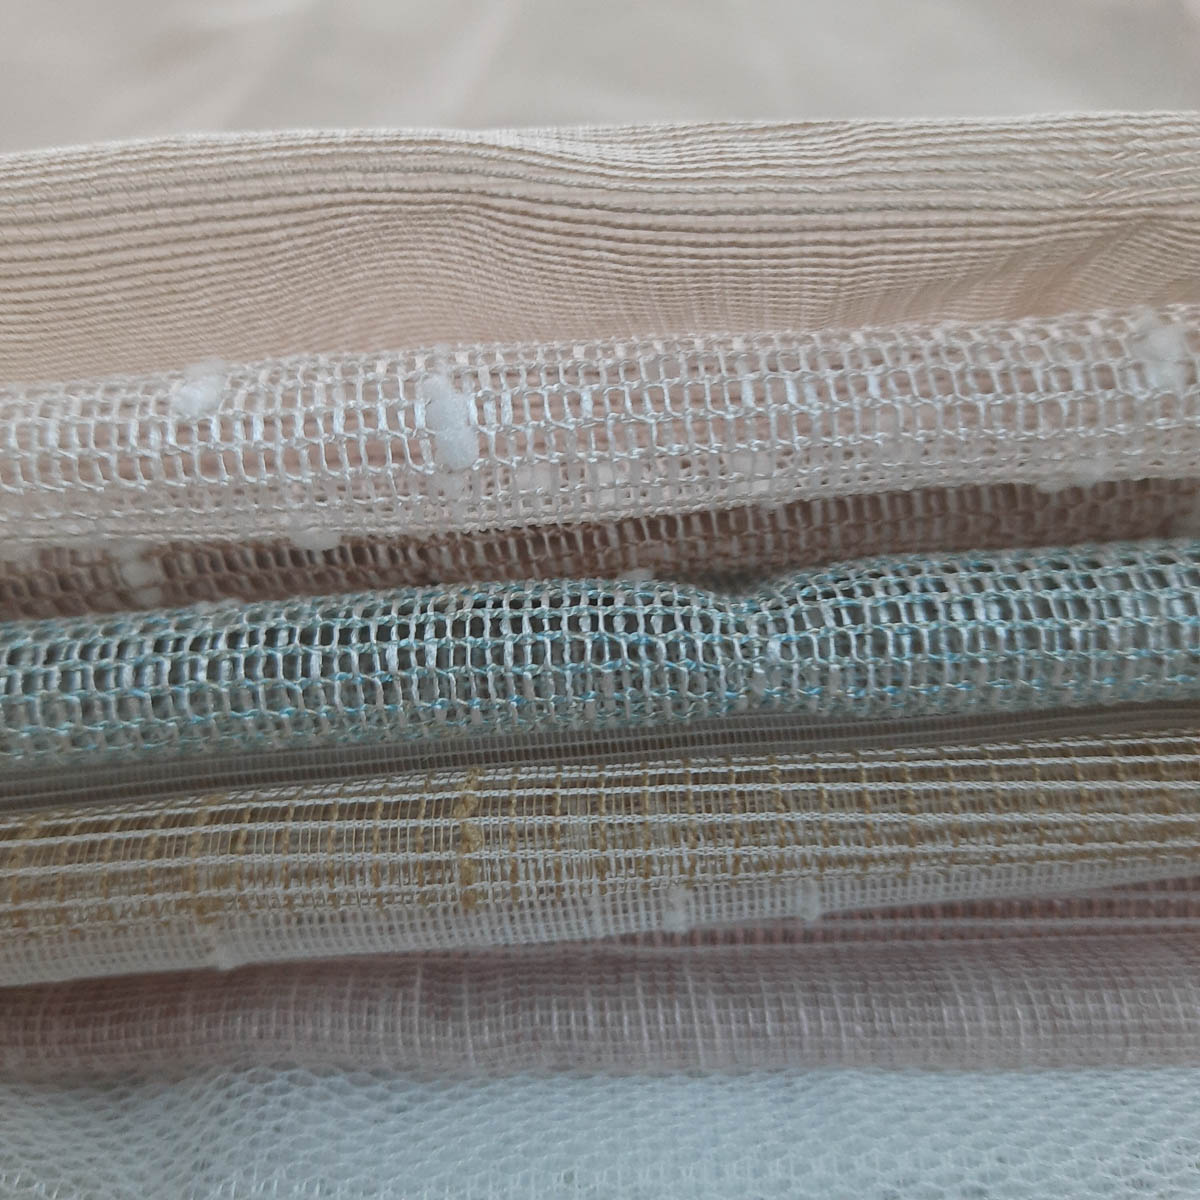 Close-up photo of the Hamide Originals Tulle Sacs showing diverse texture of the fabric